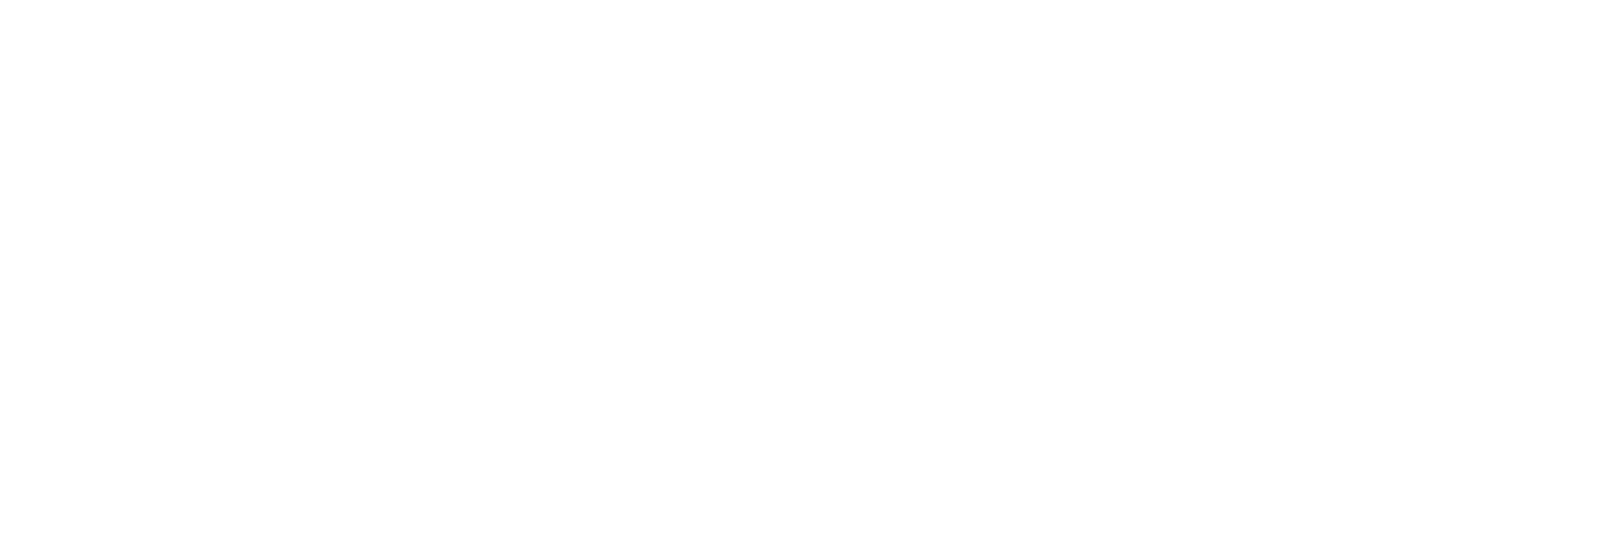 Collection logos_for -18